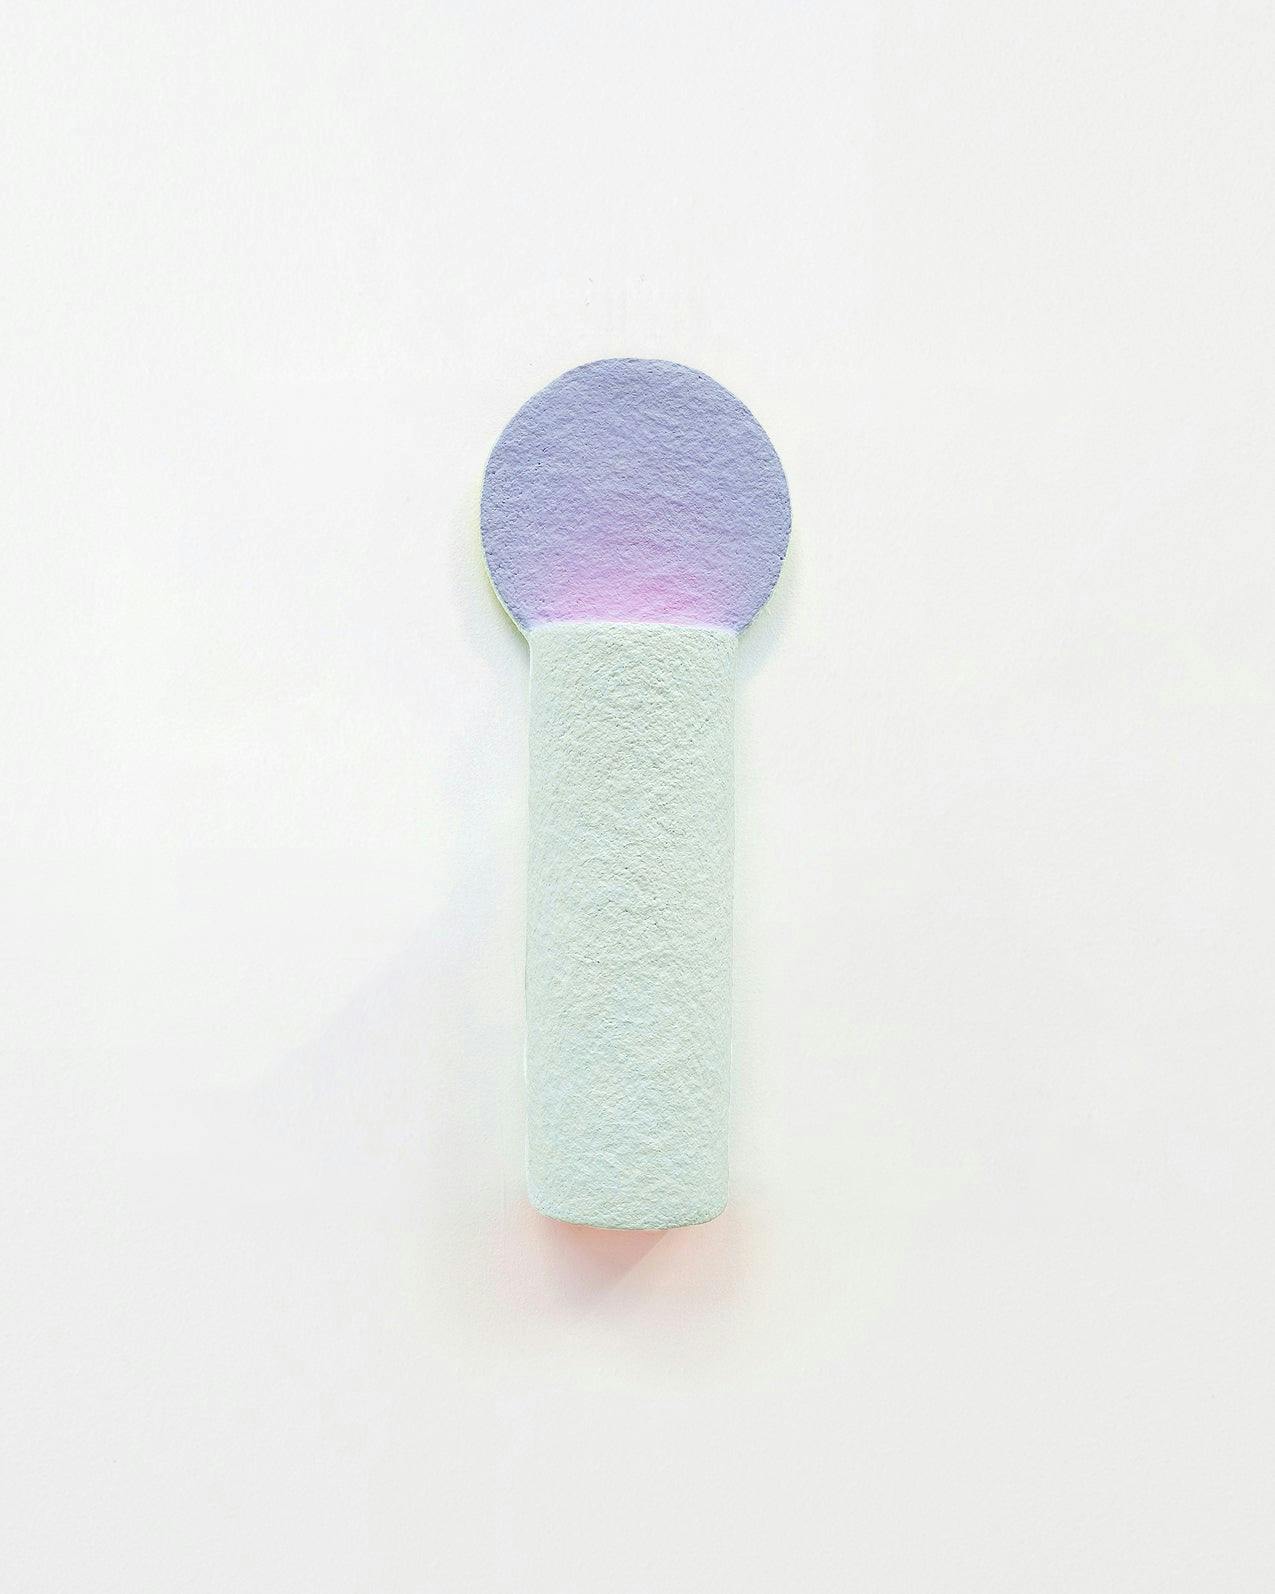 Mixed Media by Adam Frezza & Terri Chiao (CHIAOZZA) titled "Shrine to Nothingness (Pale Lavender, Spacious Skies, Pink)".